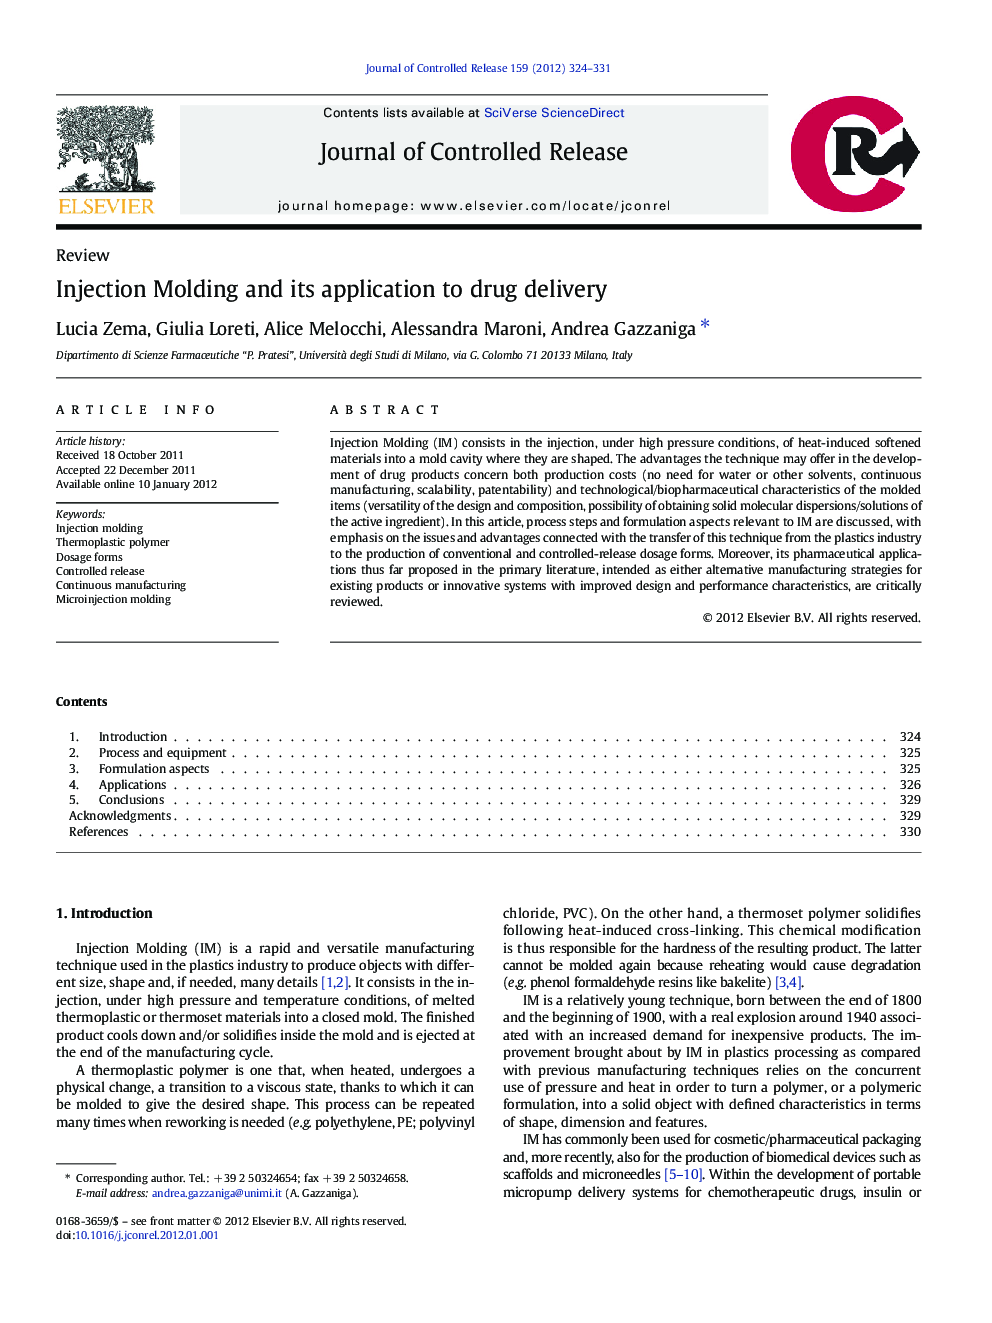 Injection Molding and its application to drug delivery